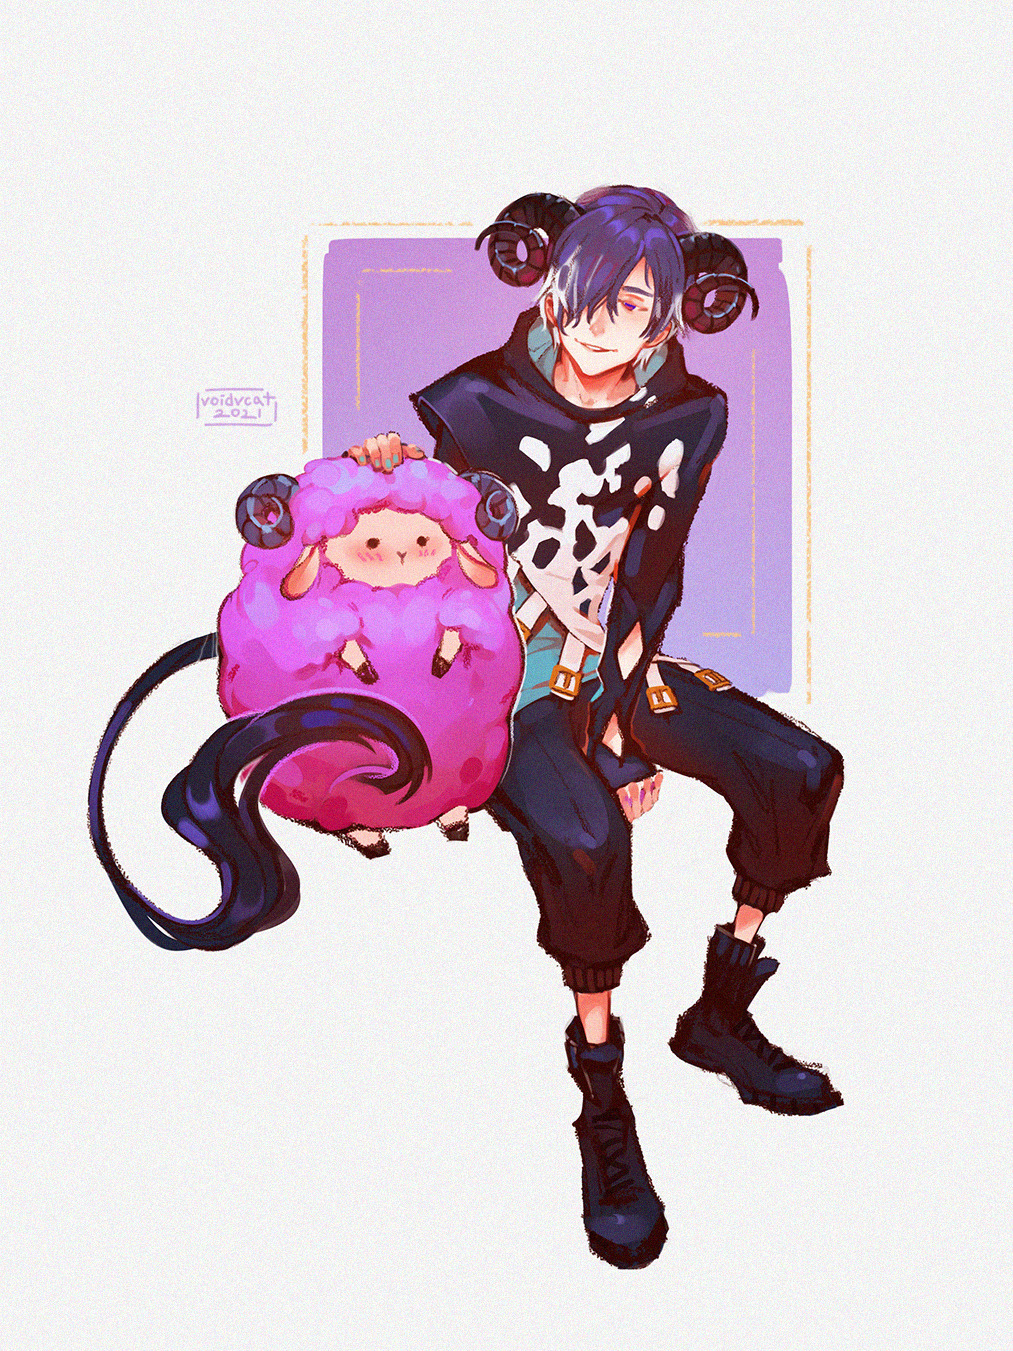 voidvcat:sheep mc is the best mc that happened to me this year T-T 